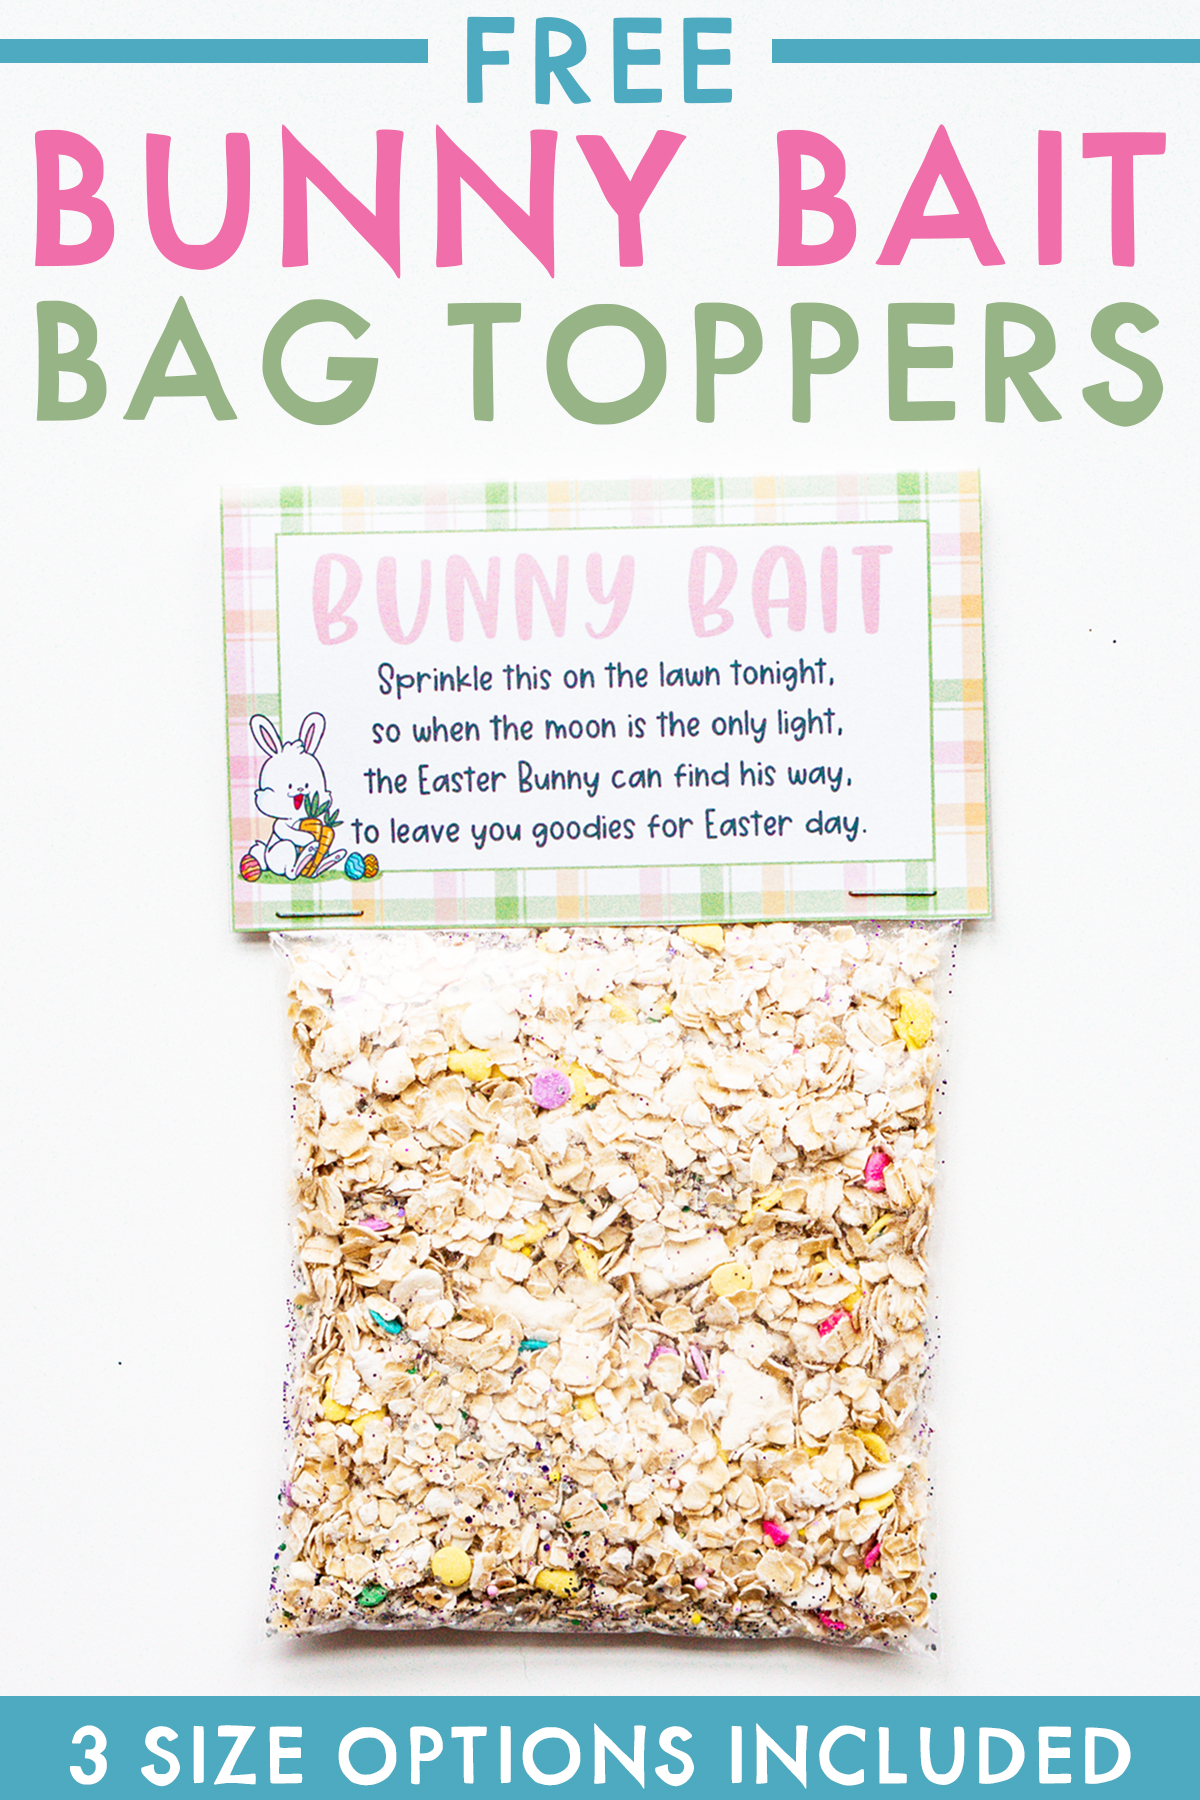 At the top it says free printable bunny bait toppers. Below that, the image shows a completed bag of bunny bait with the free bunny bait printable tag on. At the bottom it says 3 size options included.